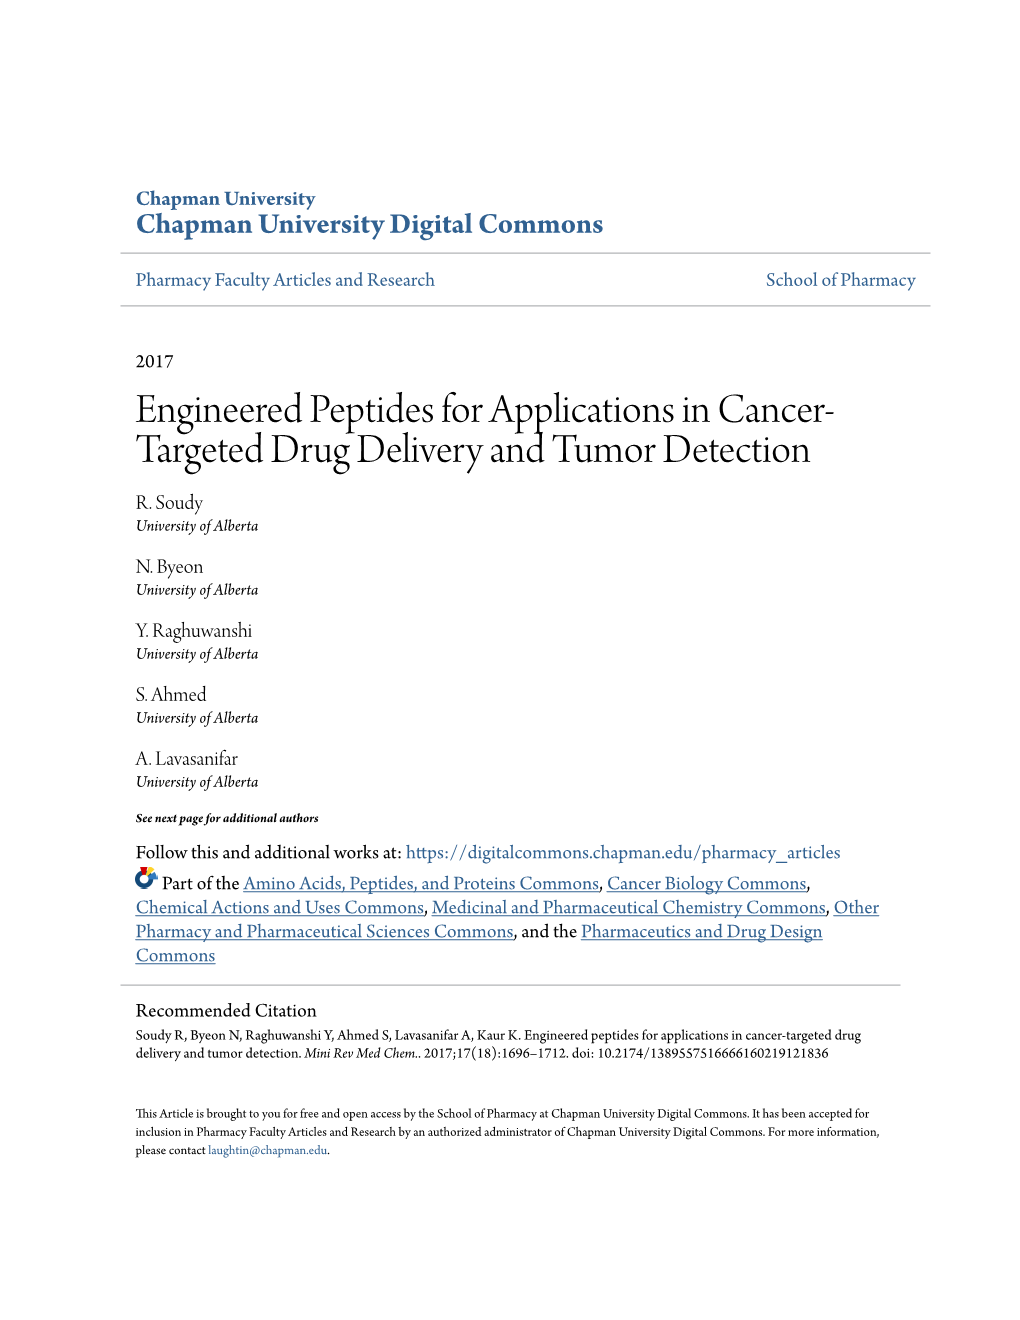 Engineered Peptides for Applications in Cancer-Targeted Drug Delivery and Tumor Detection